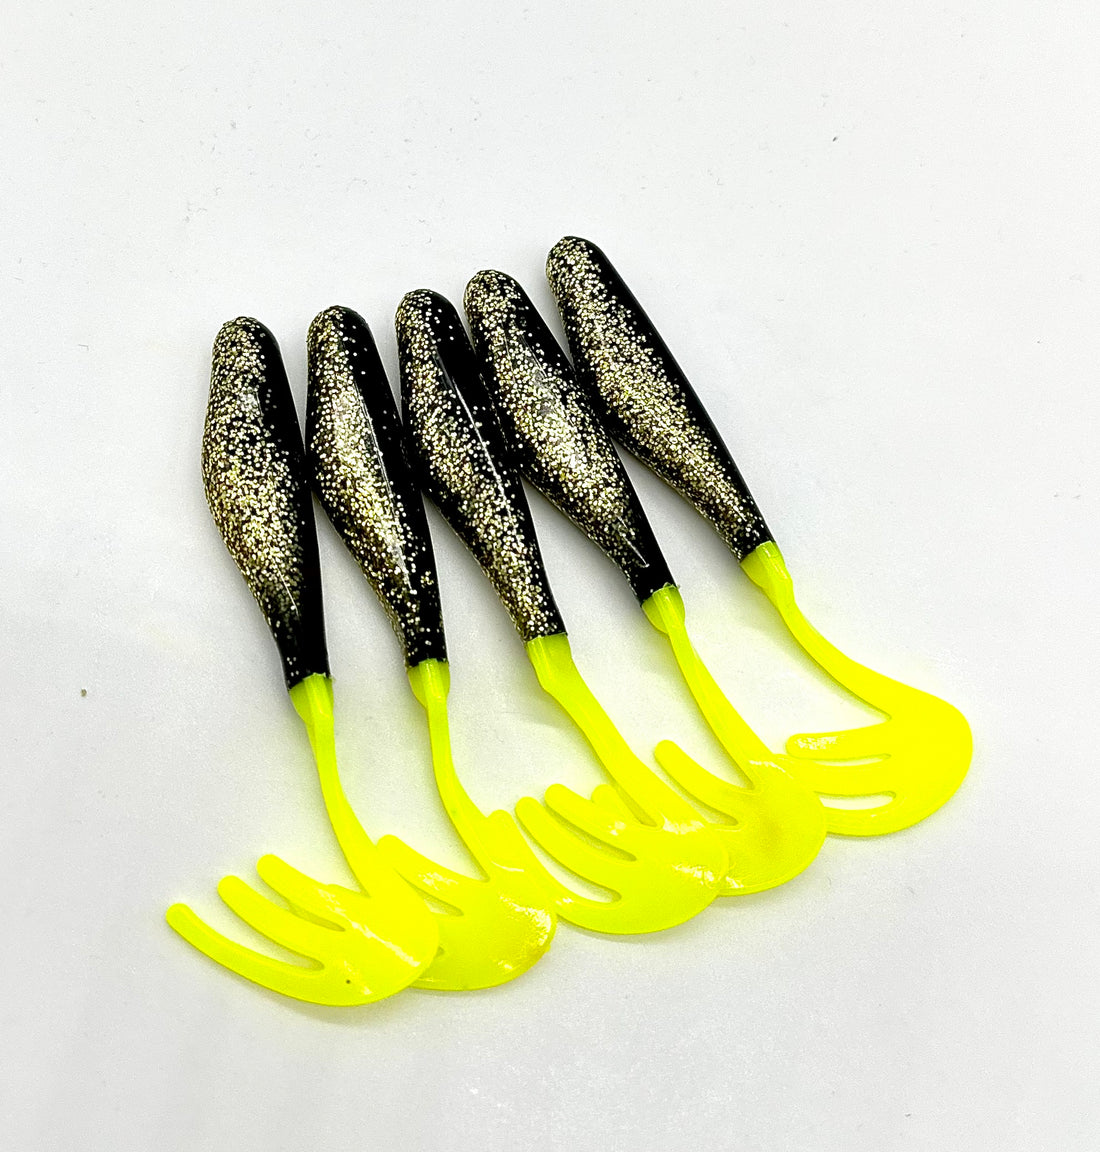 3JD Lure - 3.5" Shads - 6 Pack